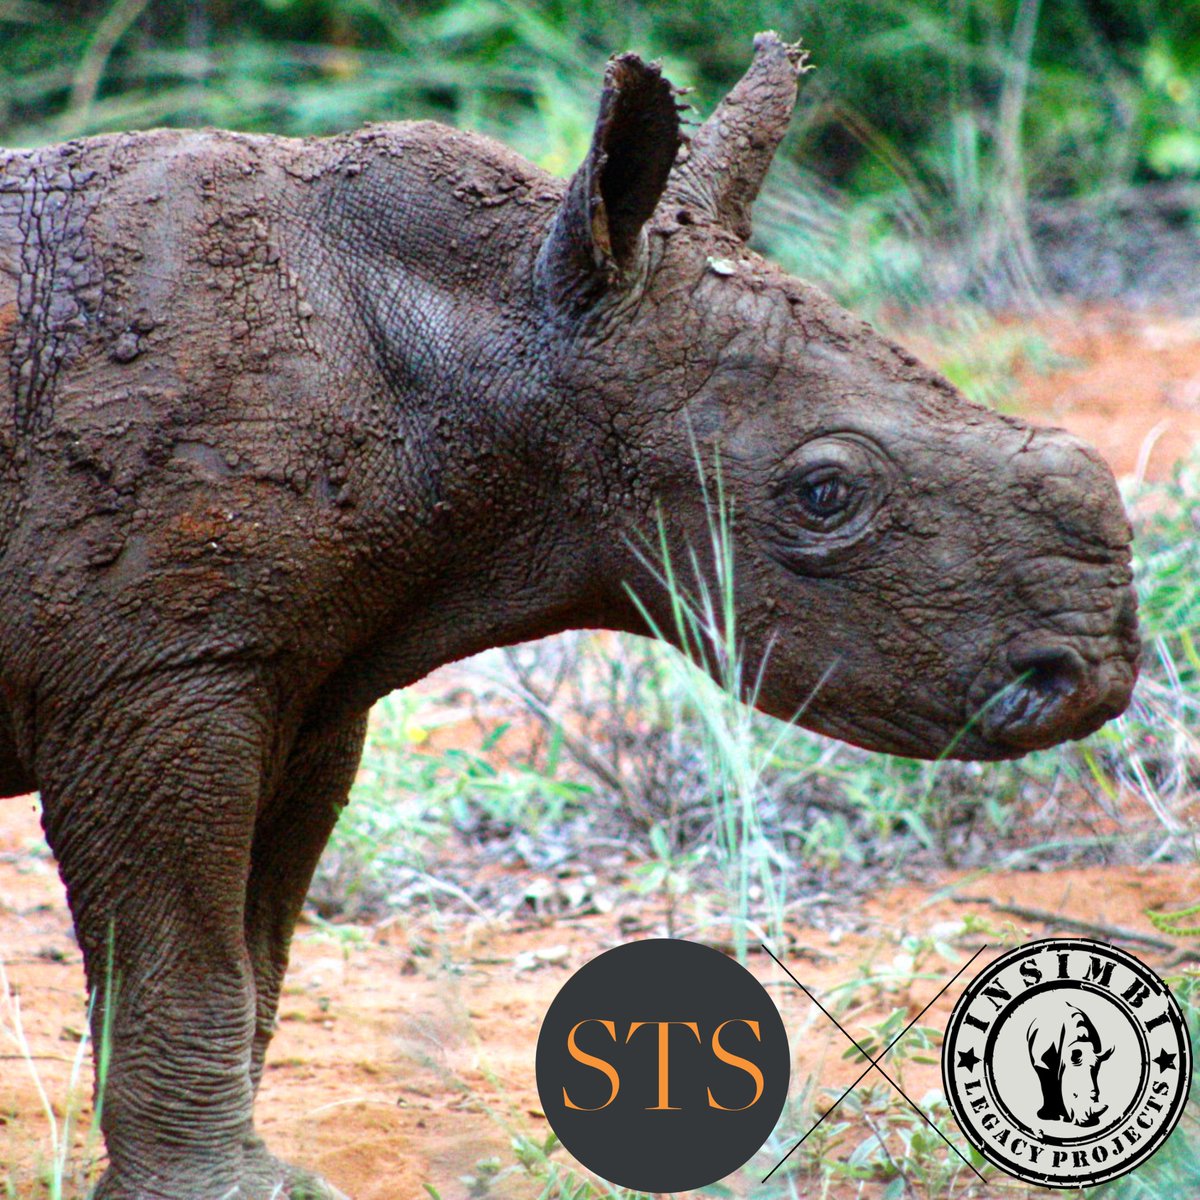 Each birth of a Rhino is a beacon of hope for conservation. While zoos worldwide share the joy of these magnificent creatures' arrivals, it's the silent, wild births that truly mark the progress in the fight against extinction. Read the full article - savingthesurvivors.org/the-heartbeat-…